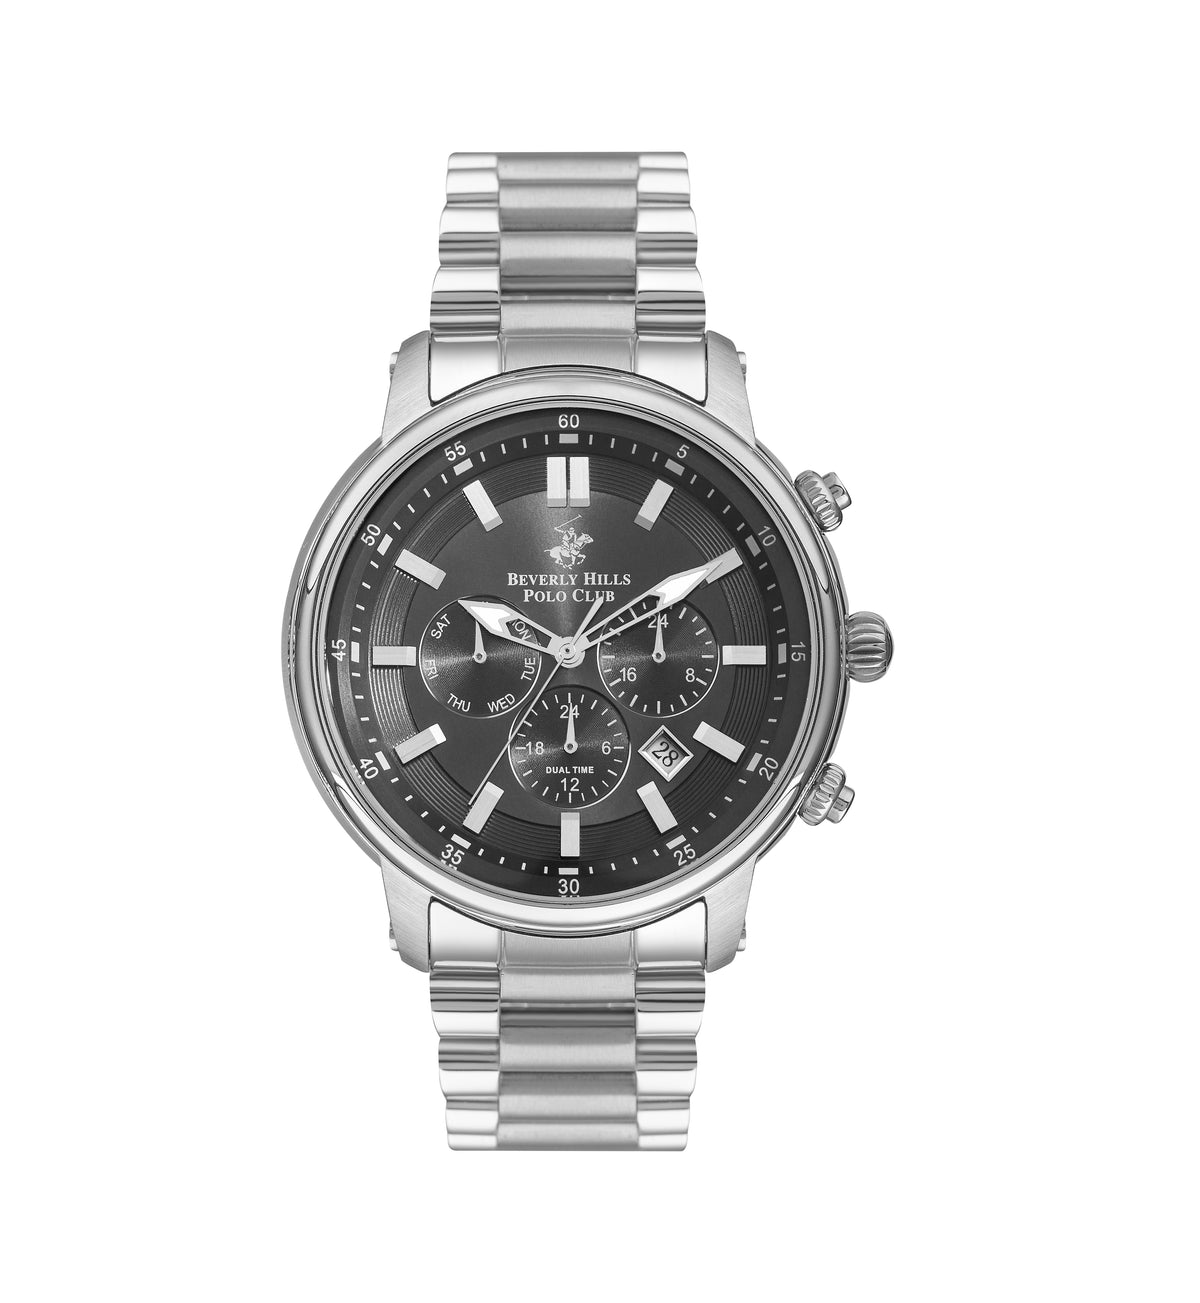 Polo - BP3254X.350 - Mens Stainless Steel Watch